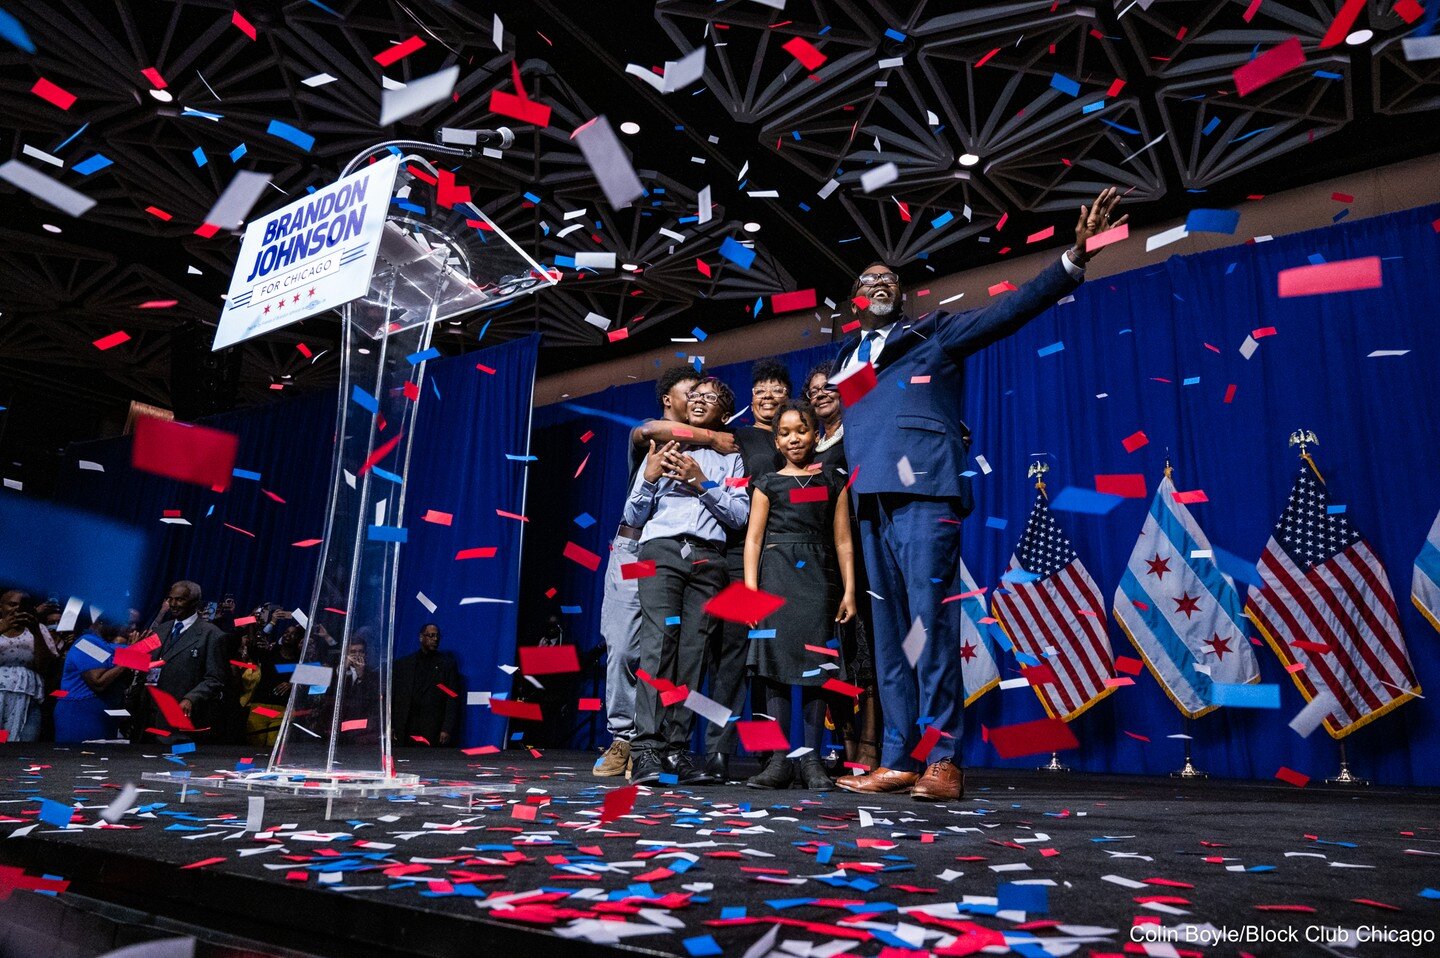 Chicago has elected itself a new mayor. Earning 51.42% of the votes counted tonight, Cook County Commissioner Brandon Johnson came from behind and defeated former CPS CEO Paul Vallas. The celebration at Johnson's election party was lively, and the em